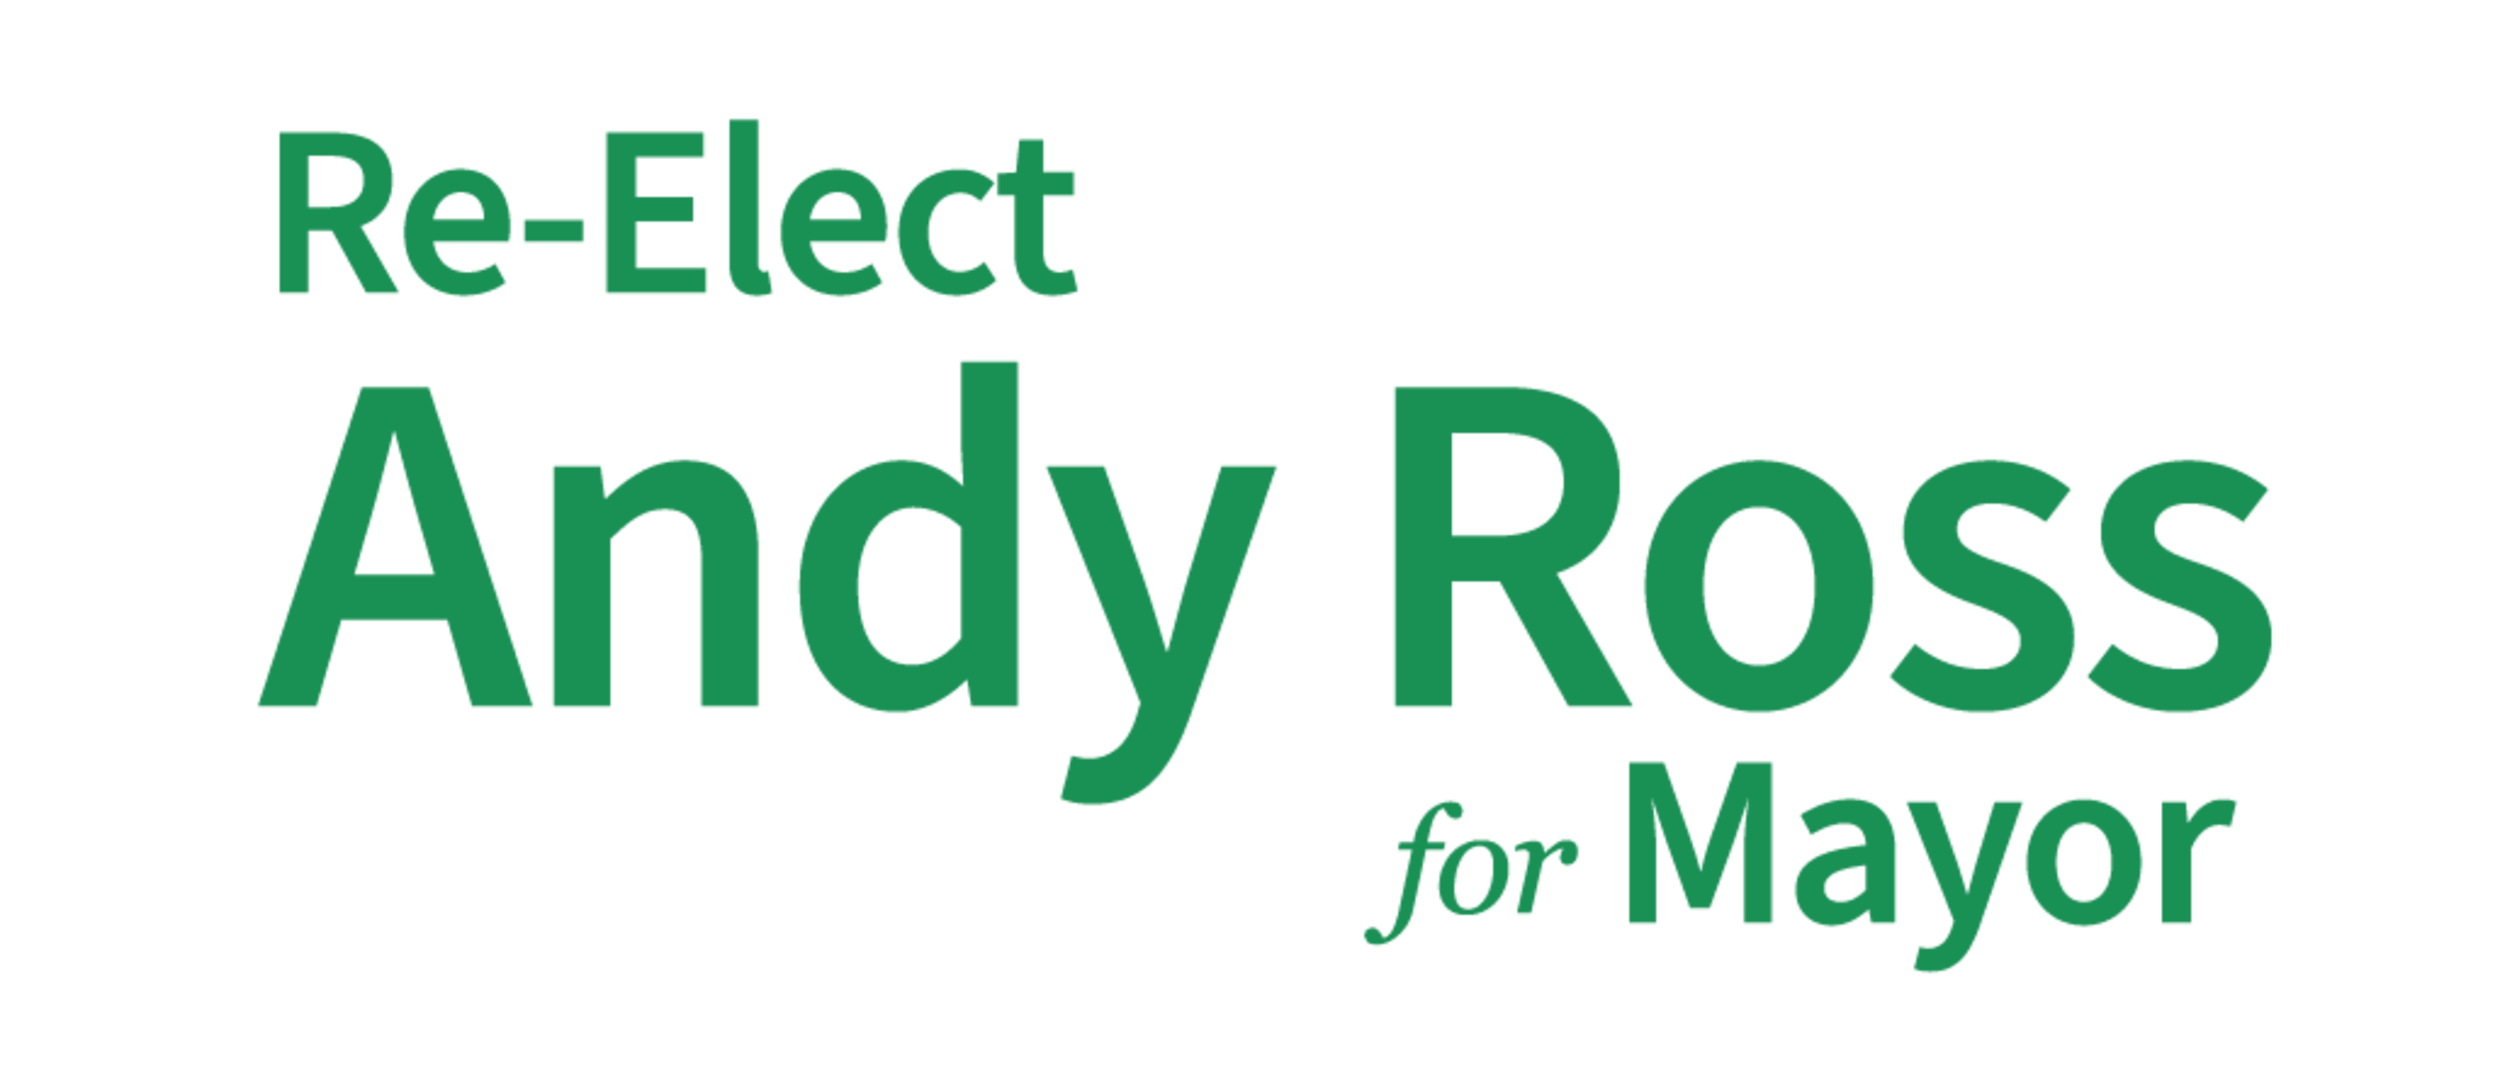 Re-Elect Andy Ross for Mayor